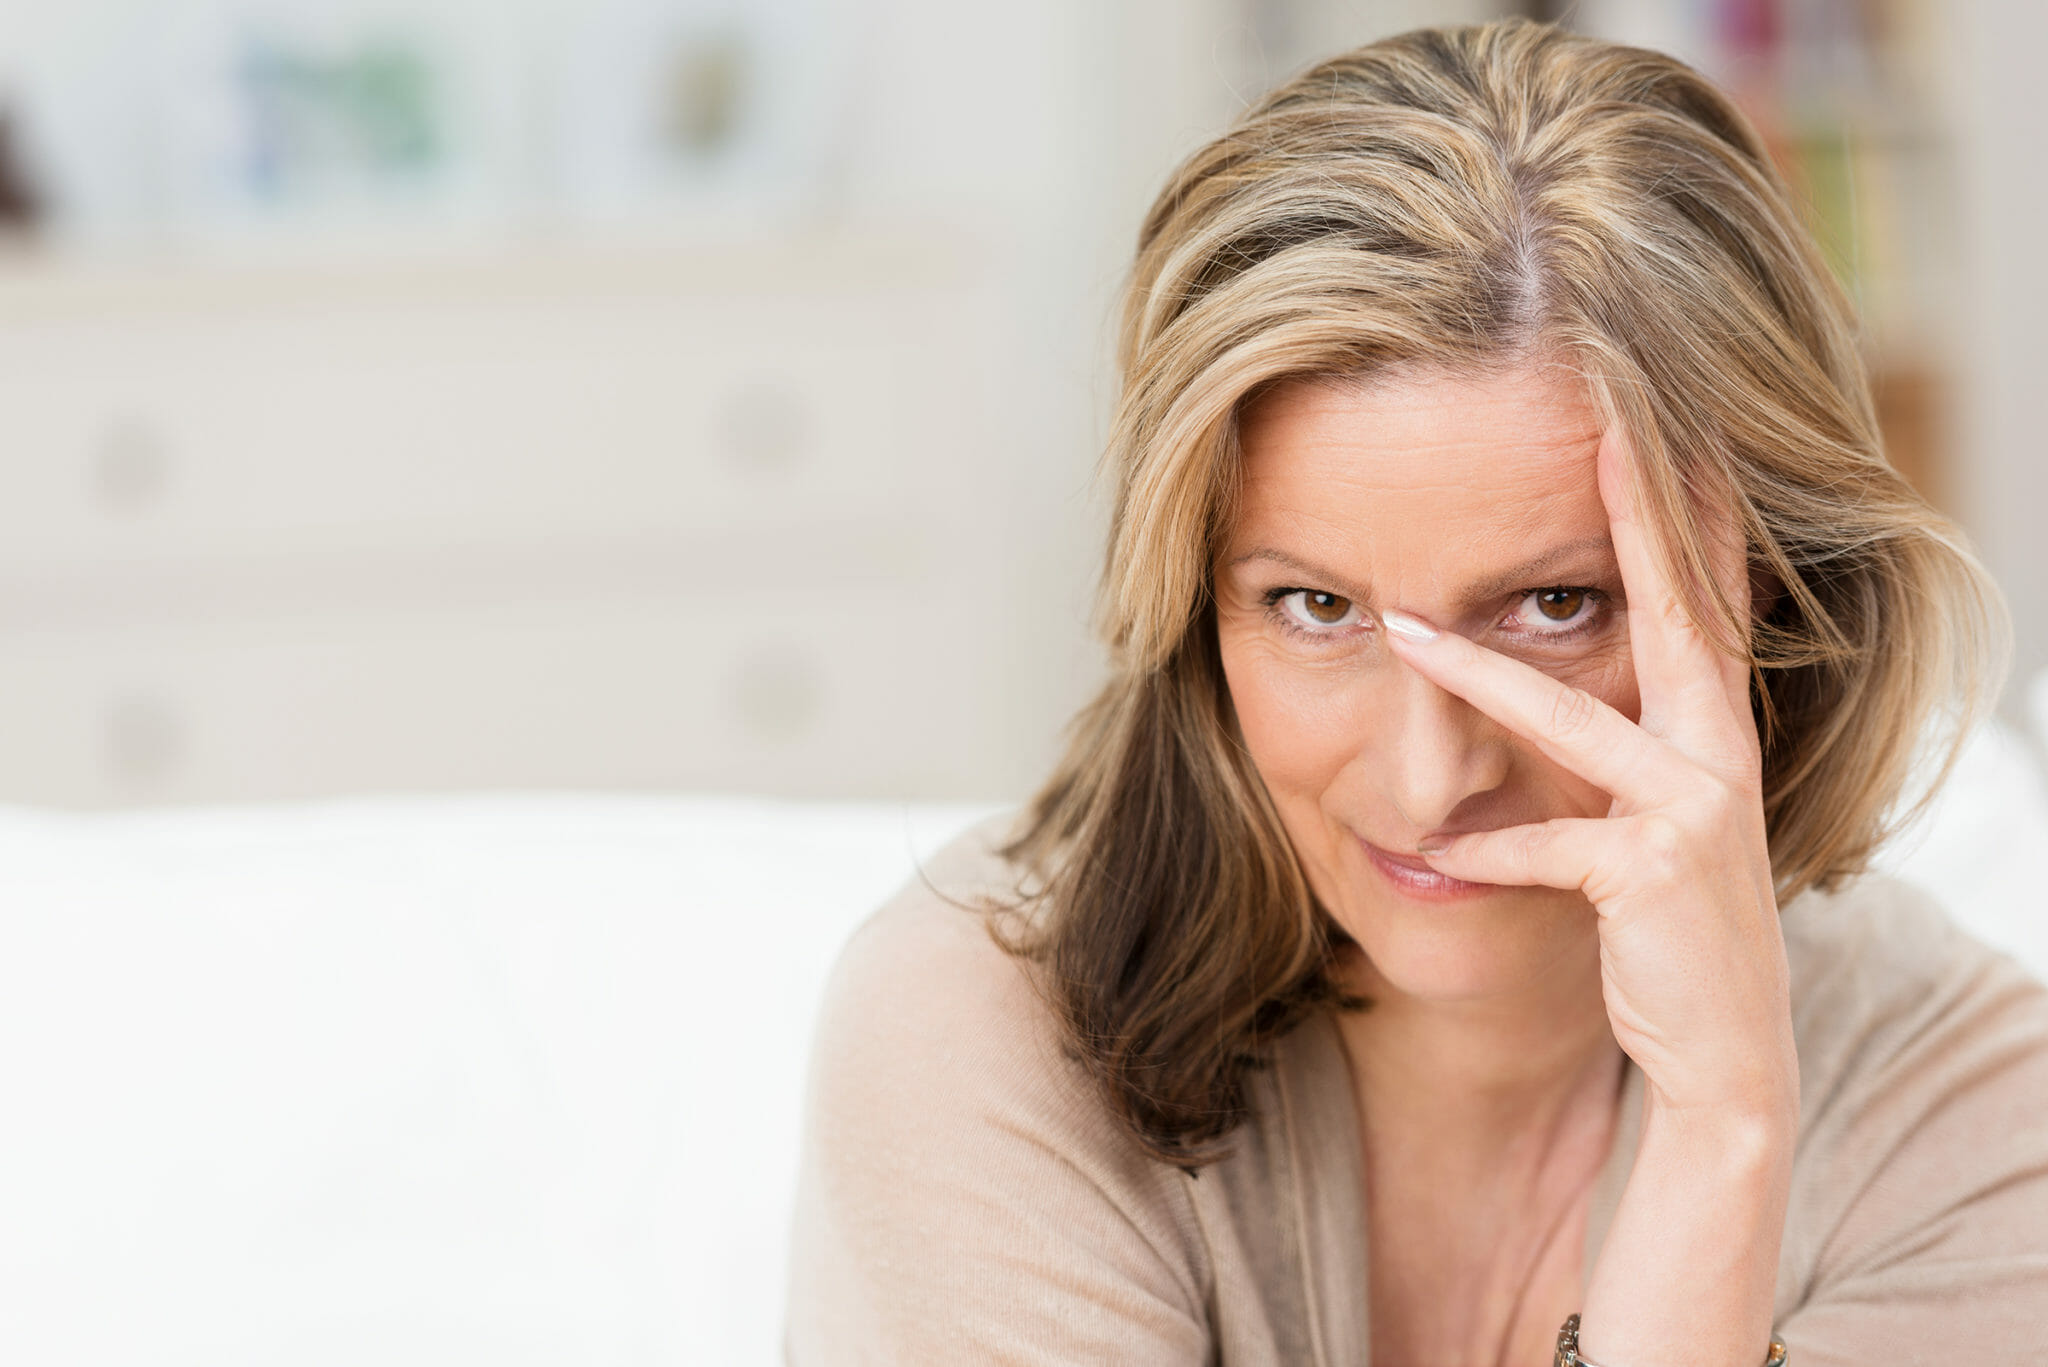 Find out how to deal with menopausal rage - MenoMe®